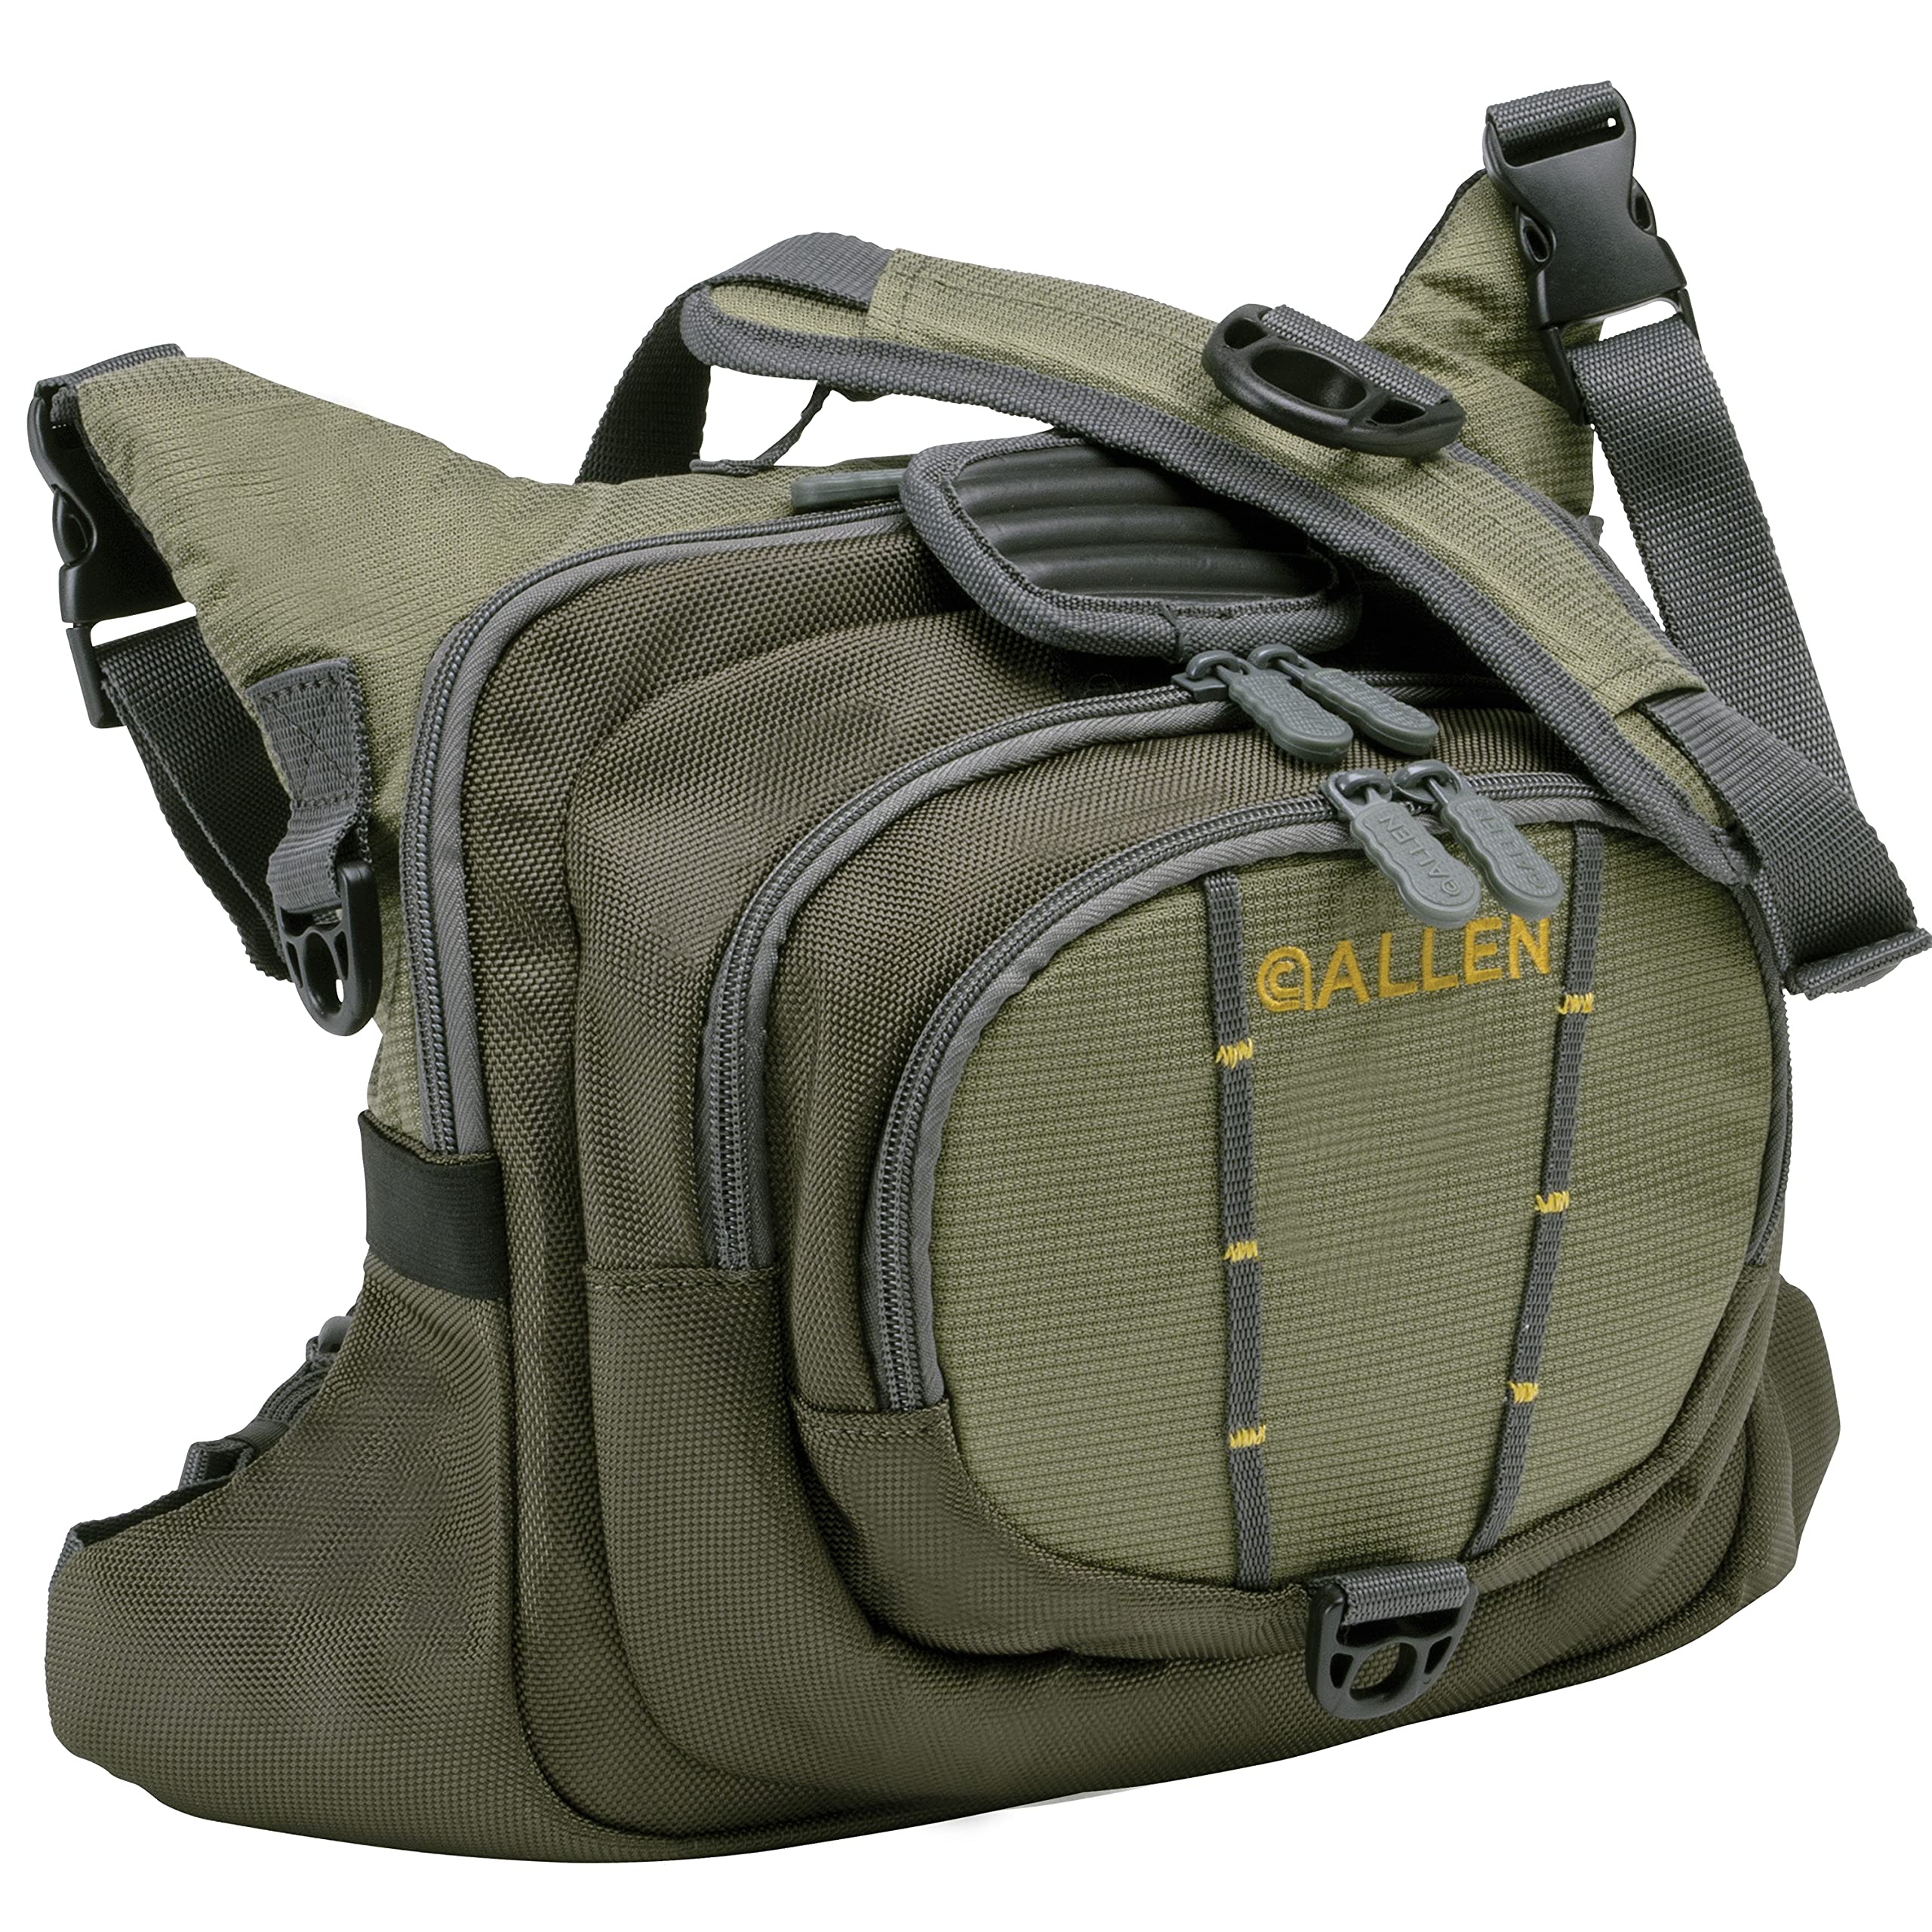 Allen Company Bear Creek Micro Fly Fishing Chest Pack, Fits up to 4 Tackle/ Fly Boxes